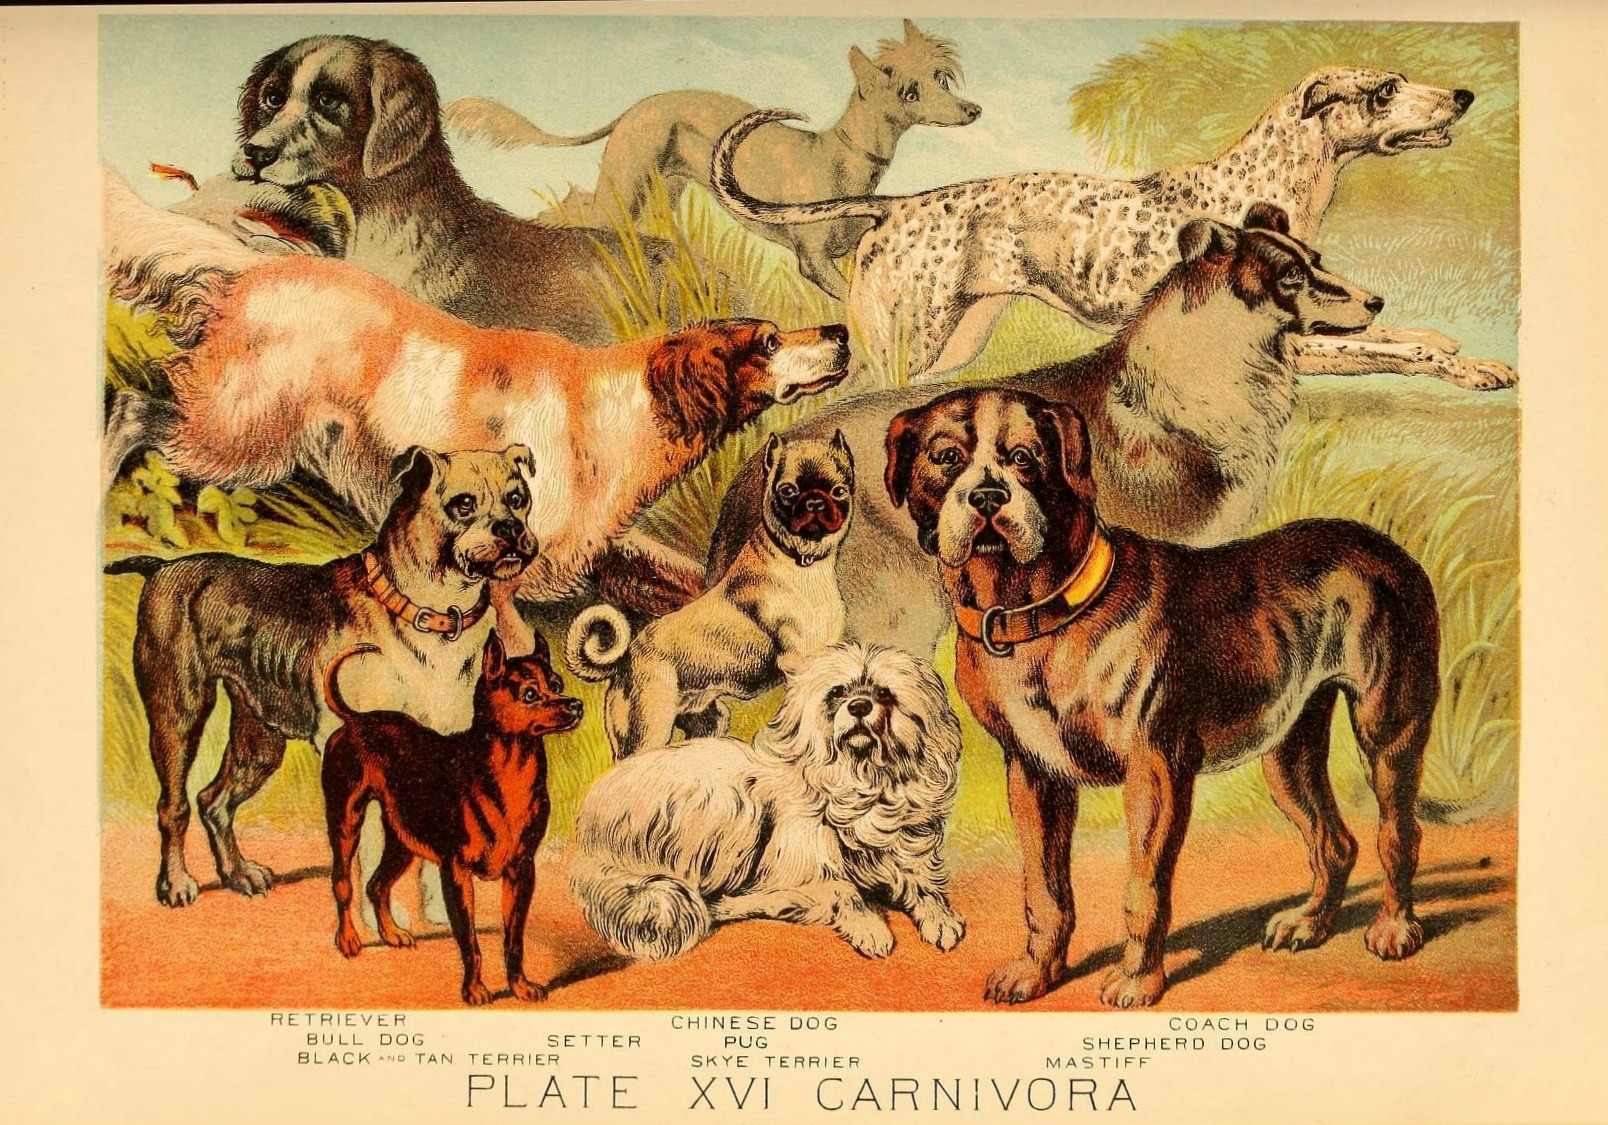 Companion dogs were often believed to have mystical abilities. Dog Illustration from Johnson’s Book of Household Nature, 1880.